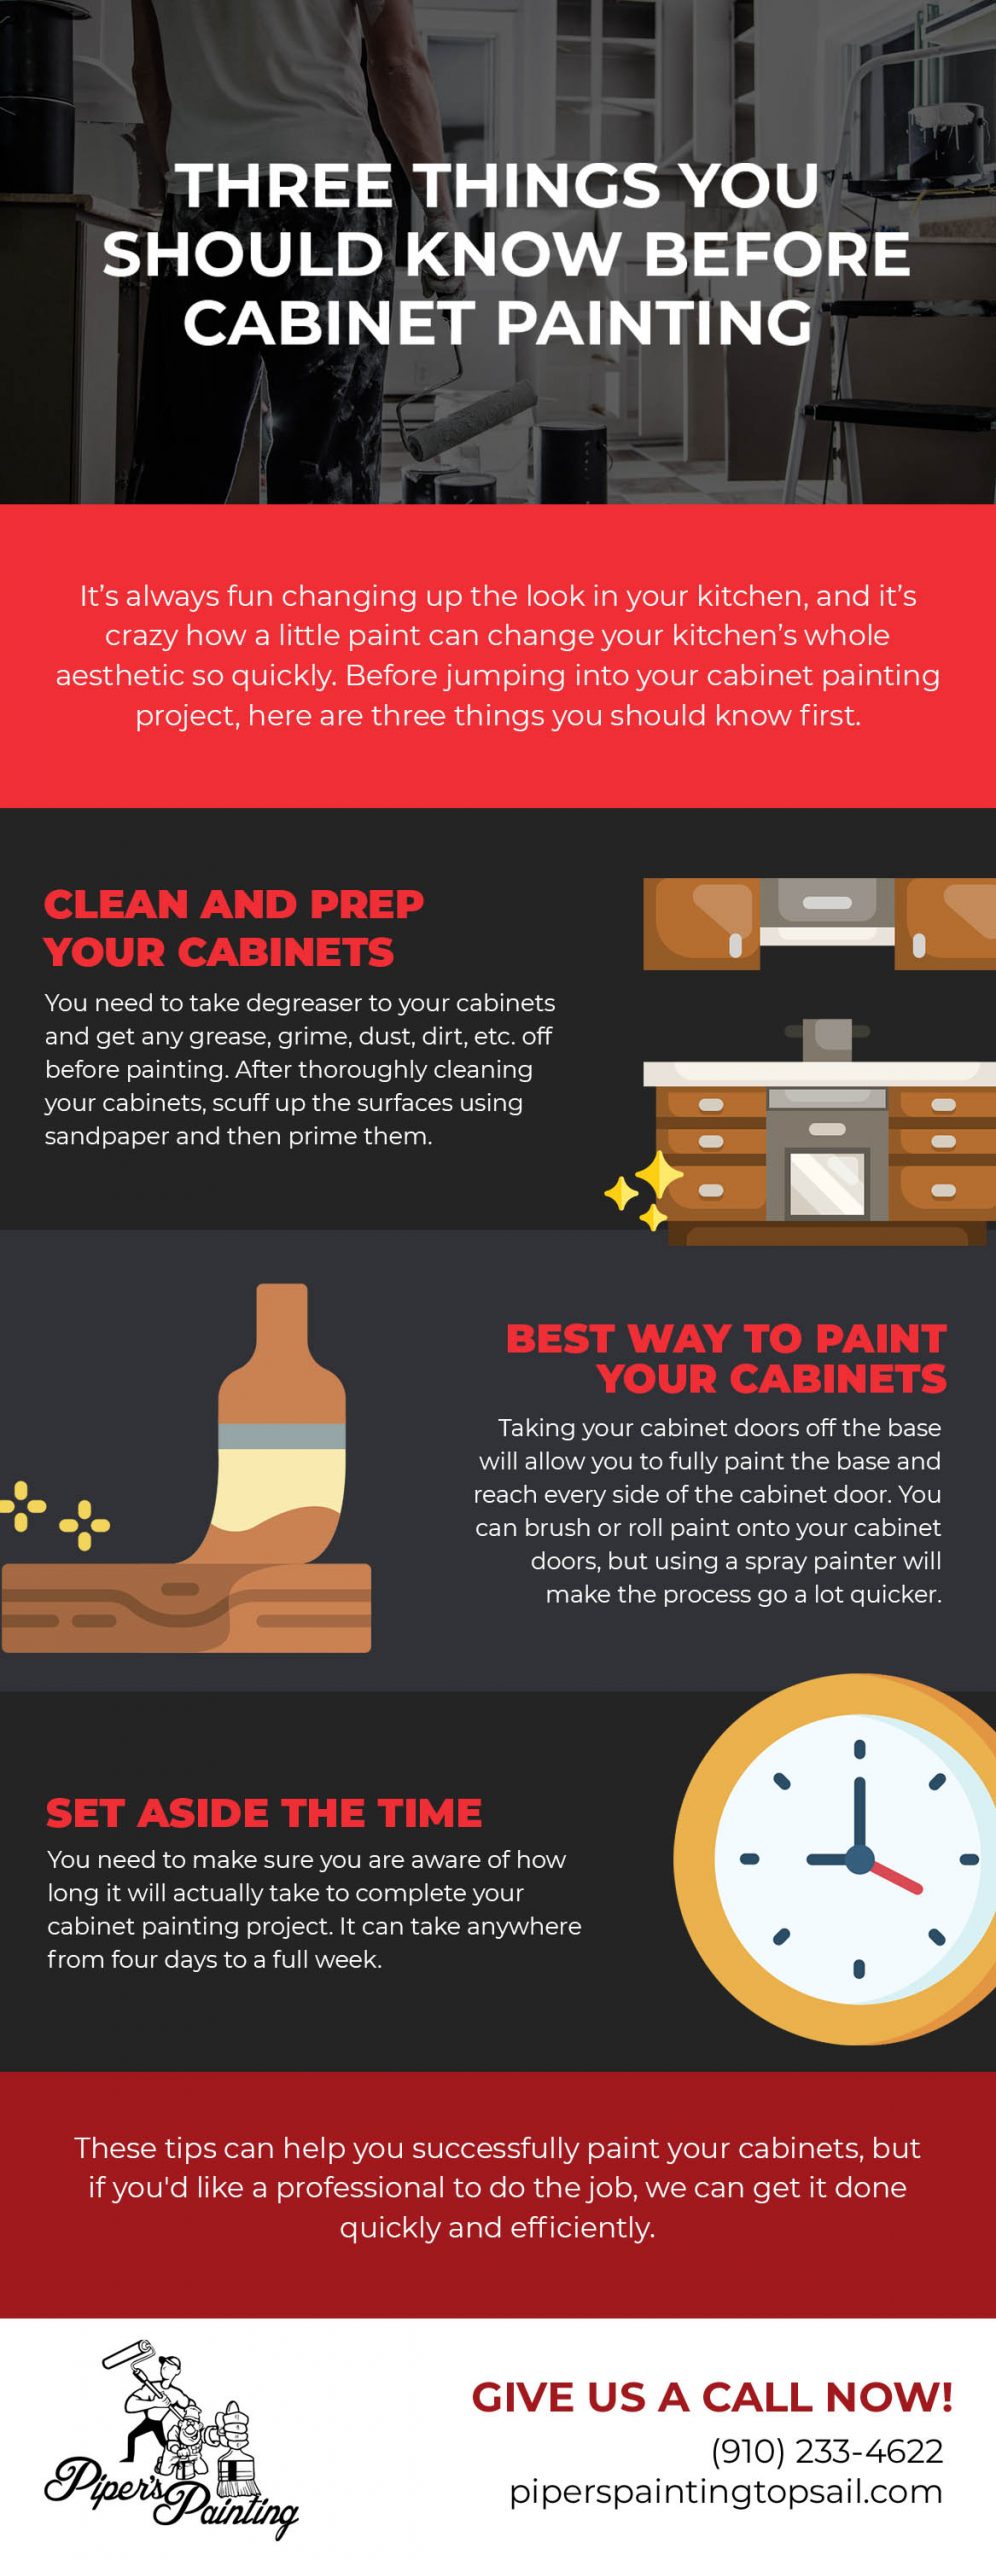 Three Things You Should Know Before Cabinet Painting